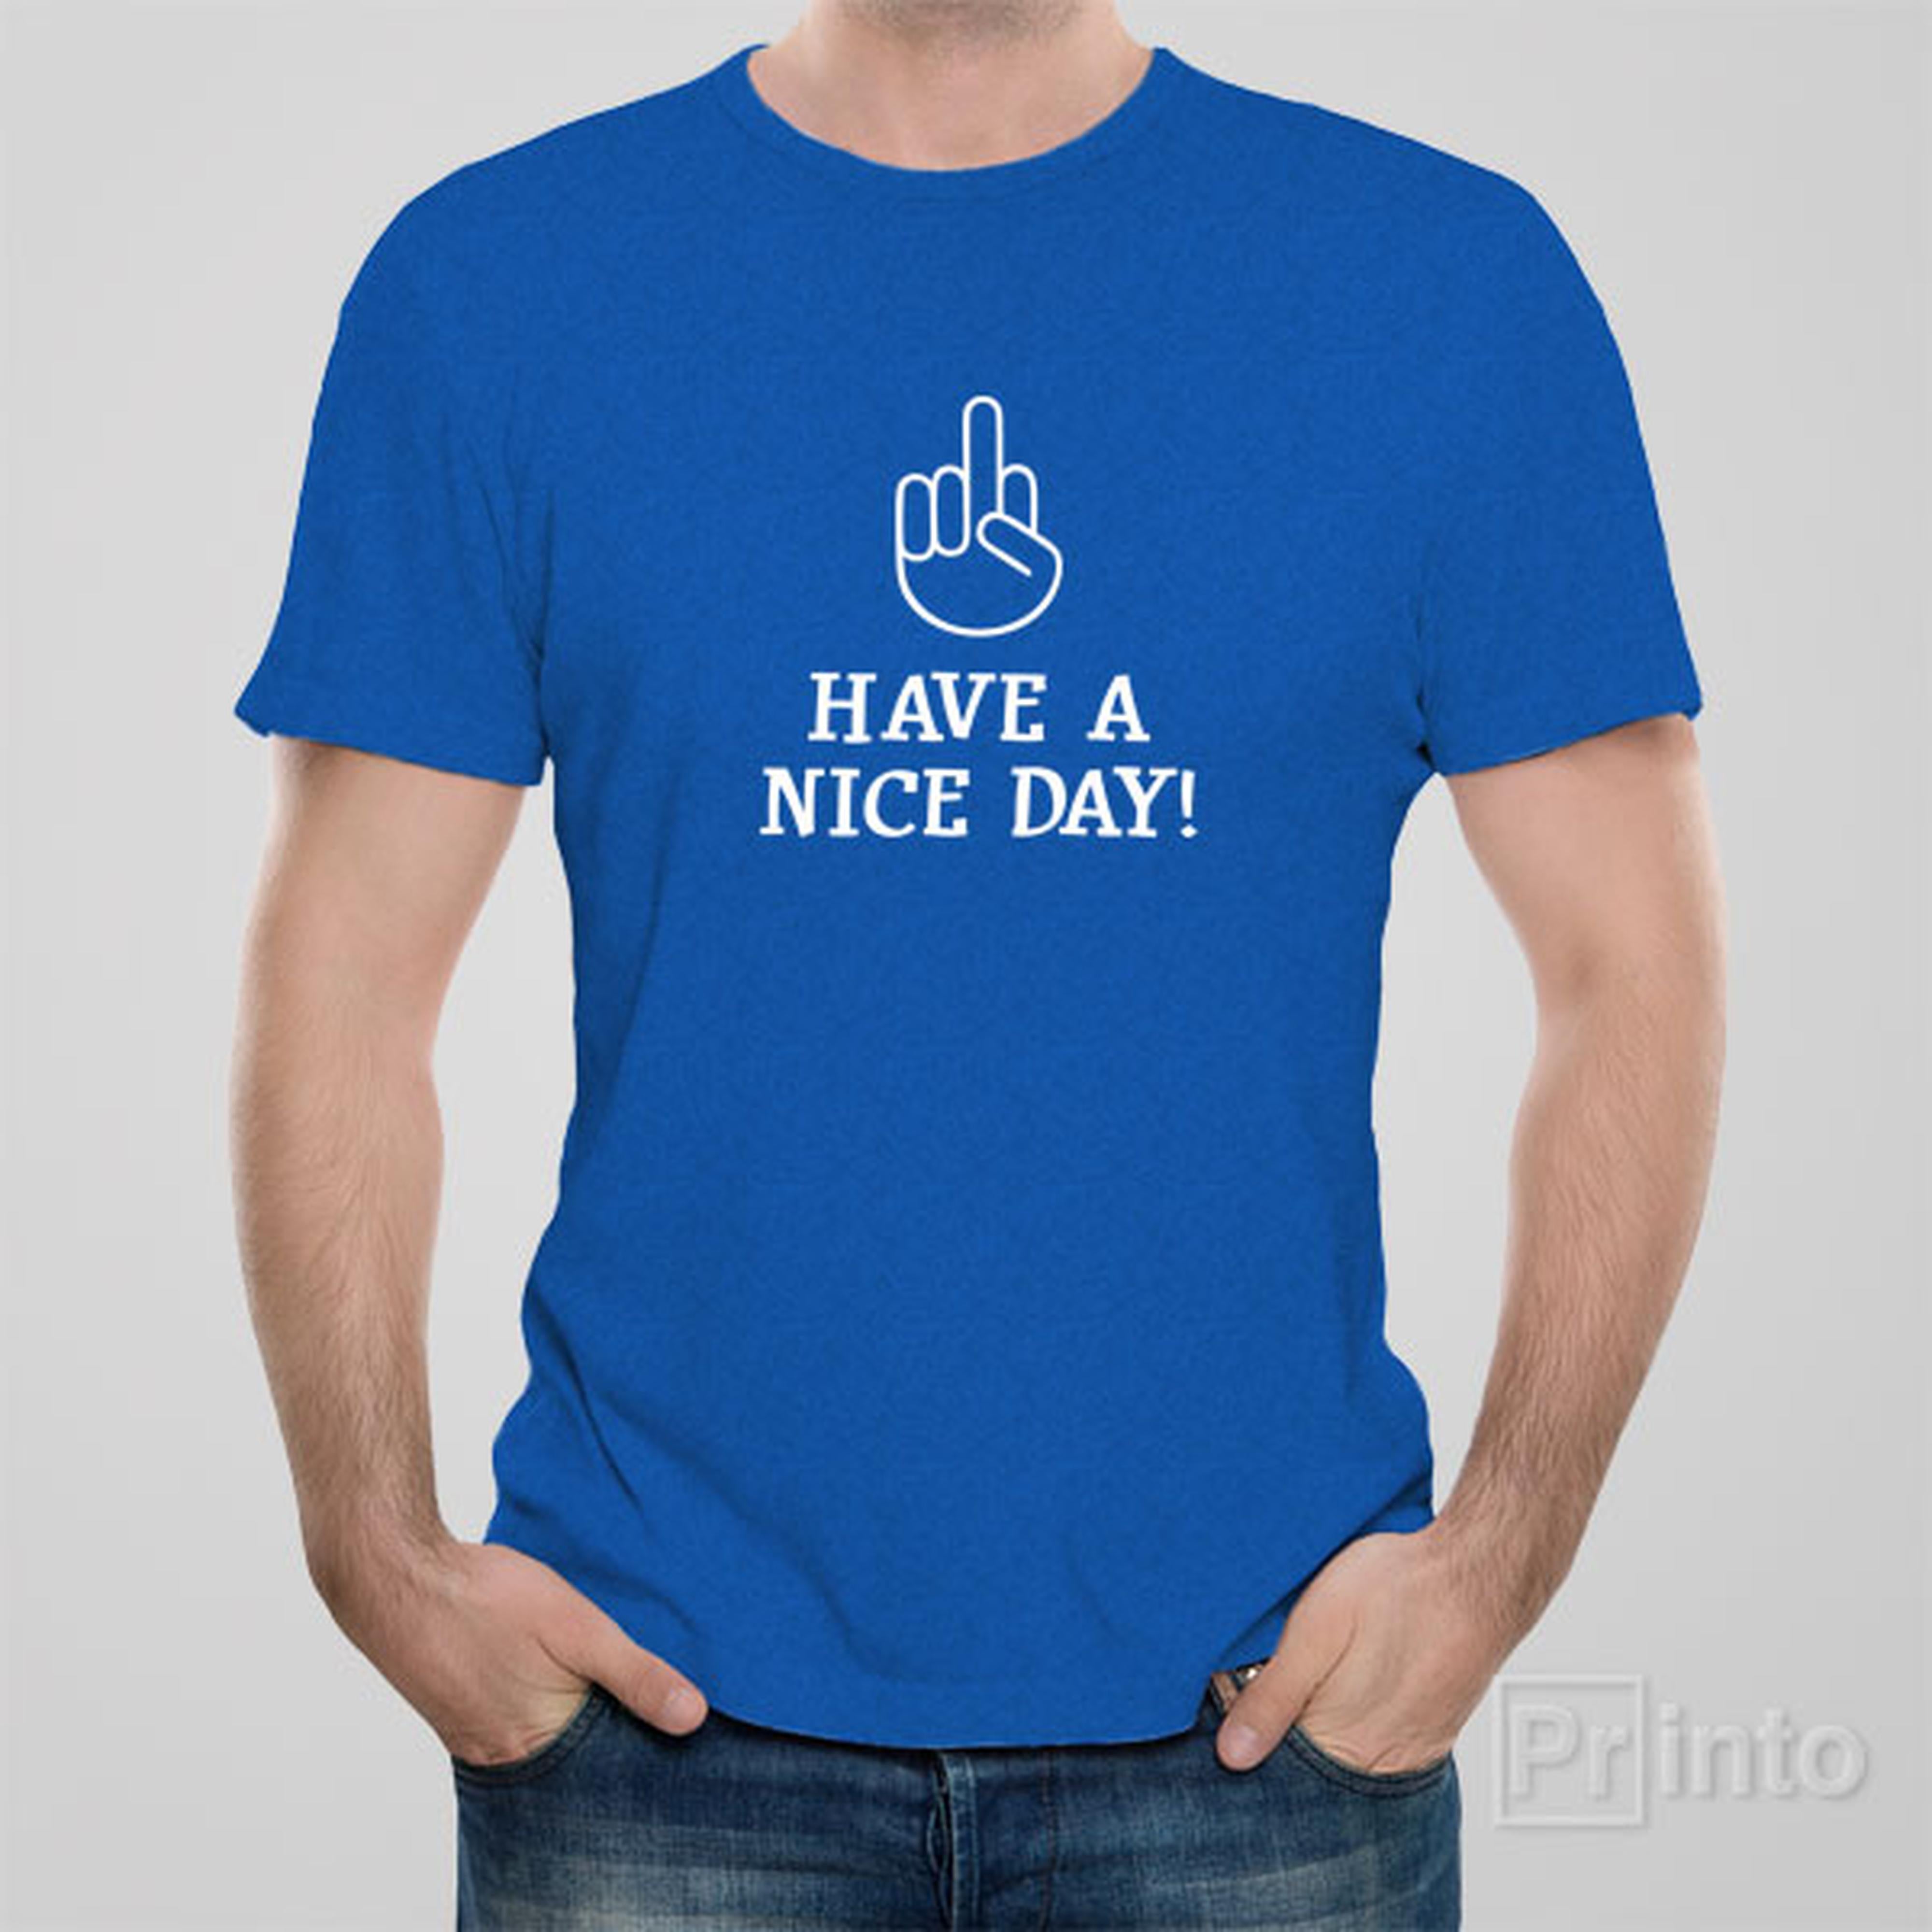 have-a-nice-day-t-shirt